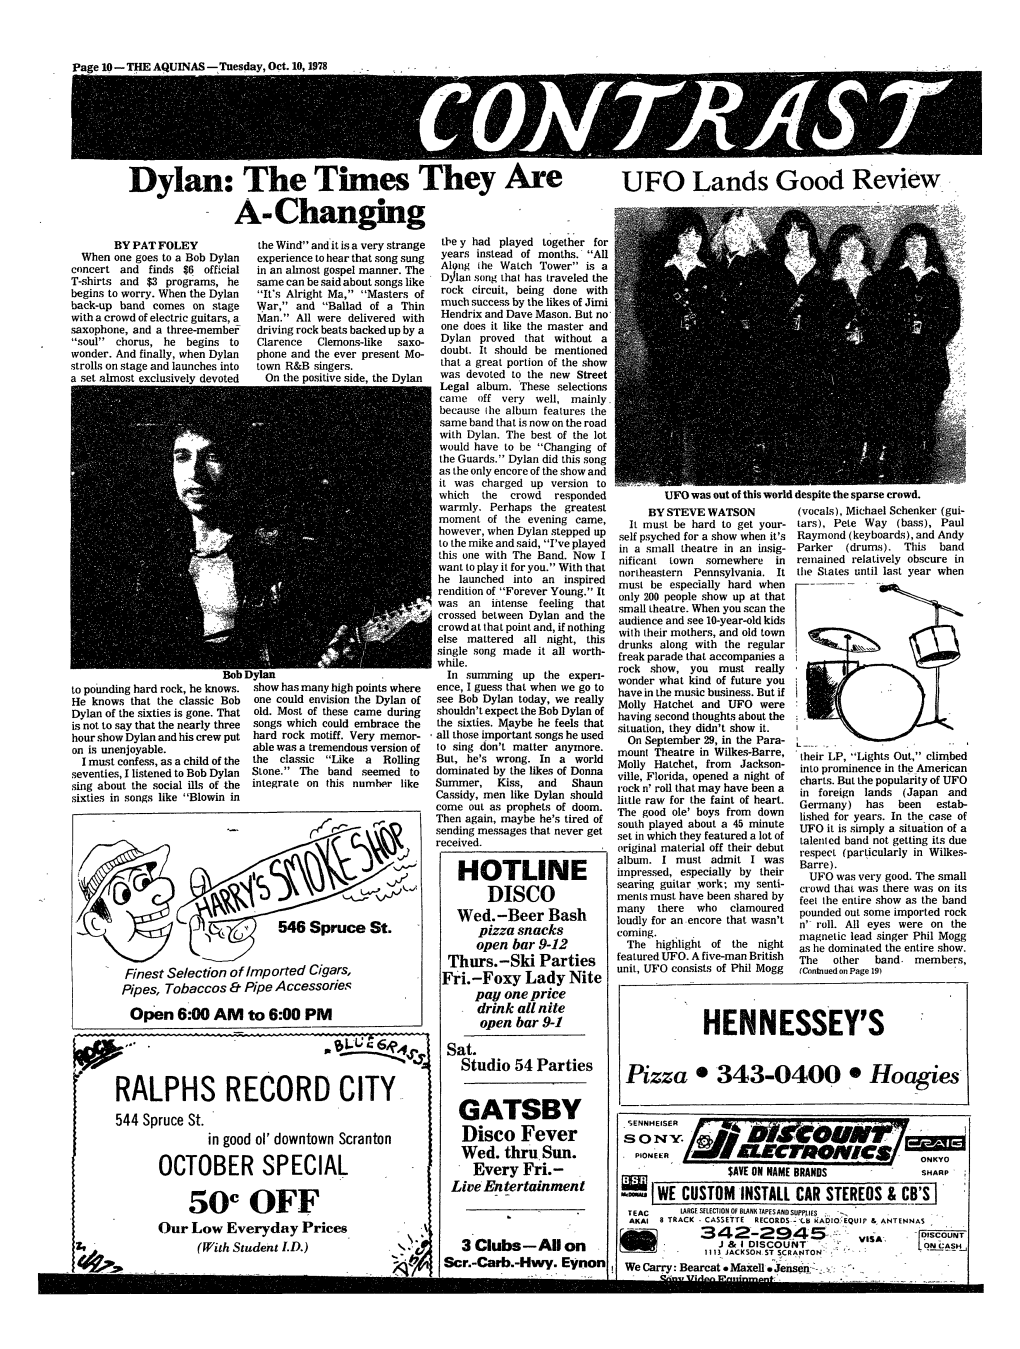 Dylan: the Times They Are UFO Lands Good Review - A-Changing